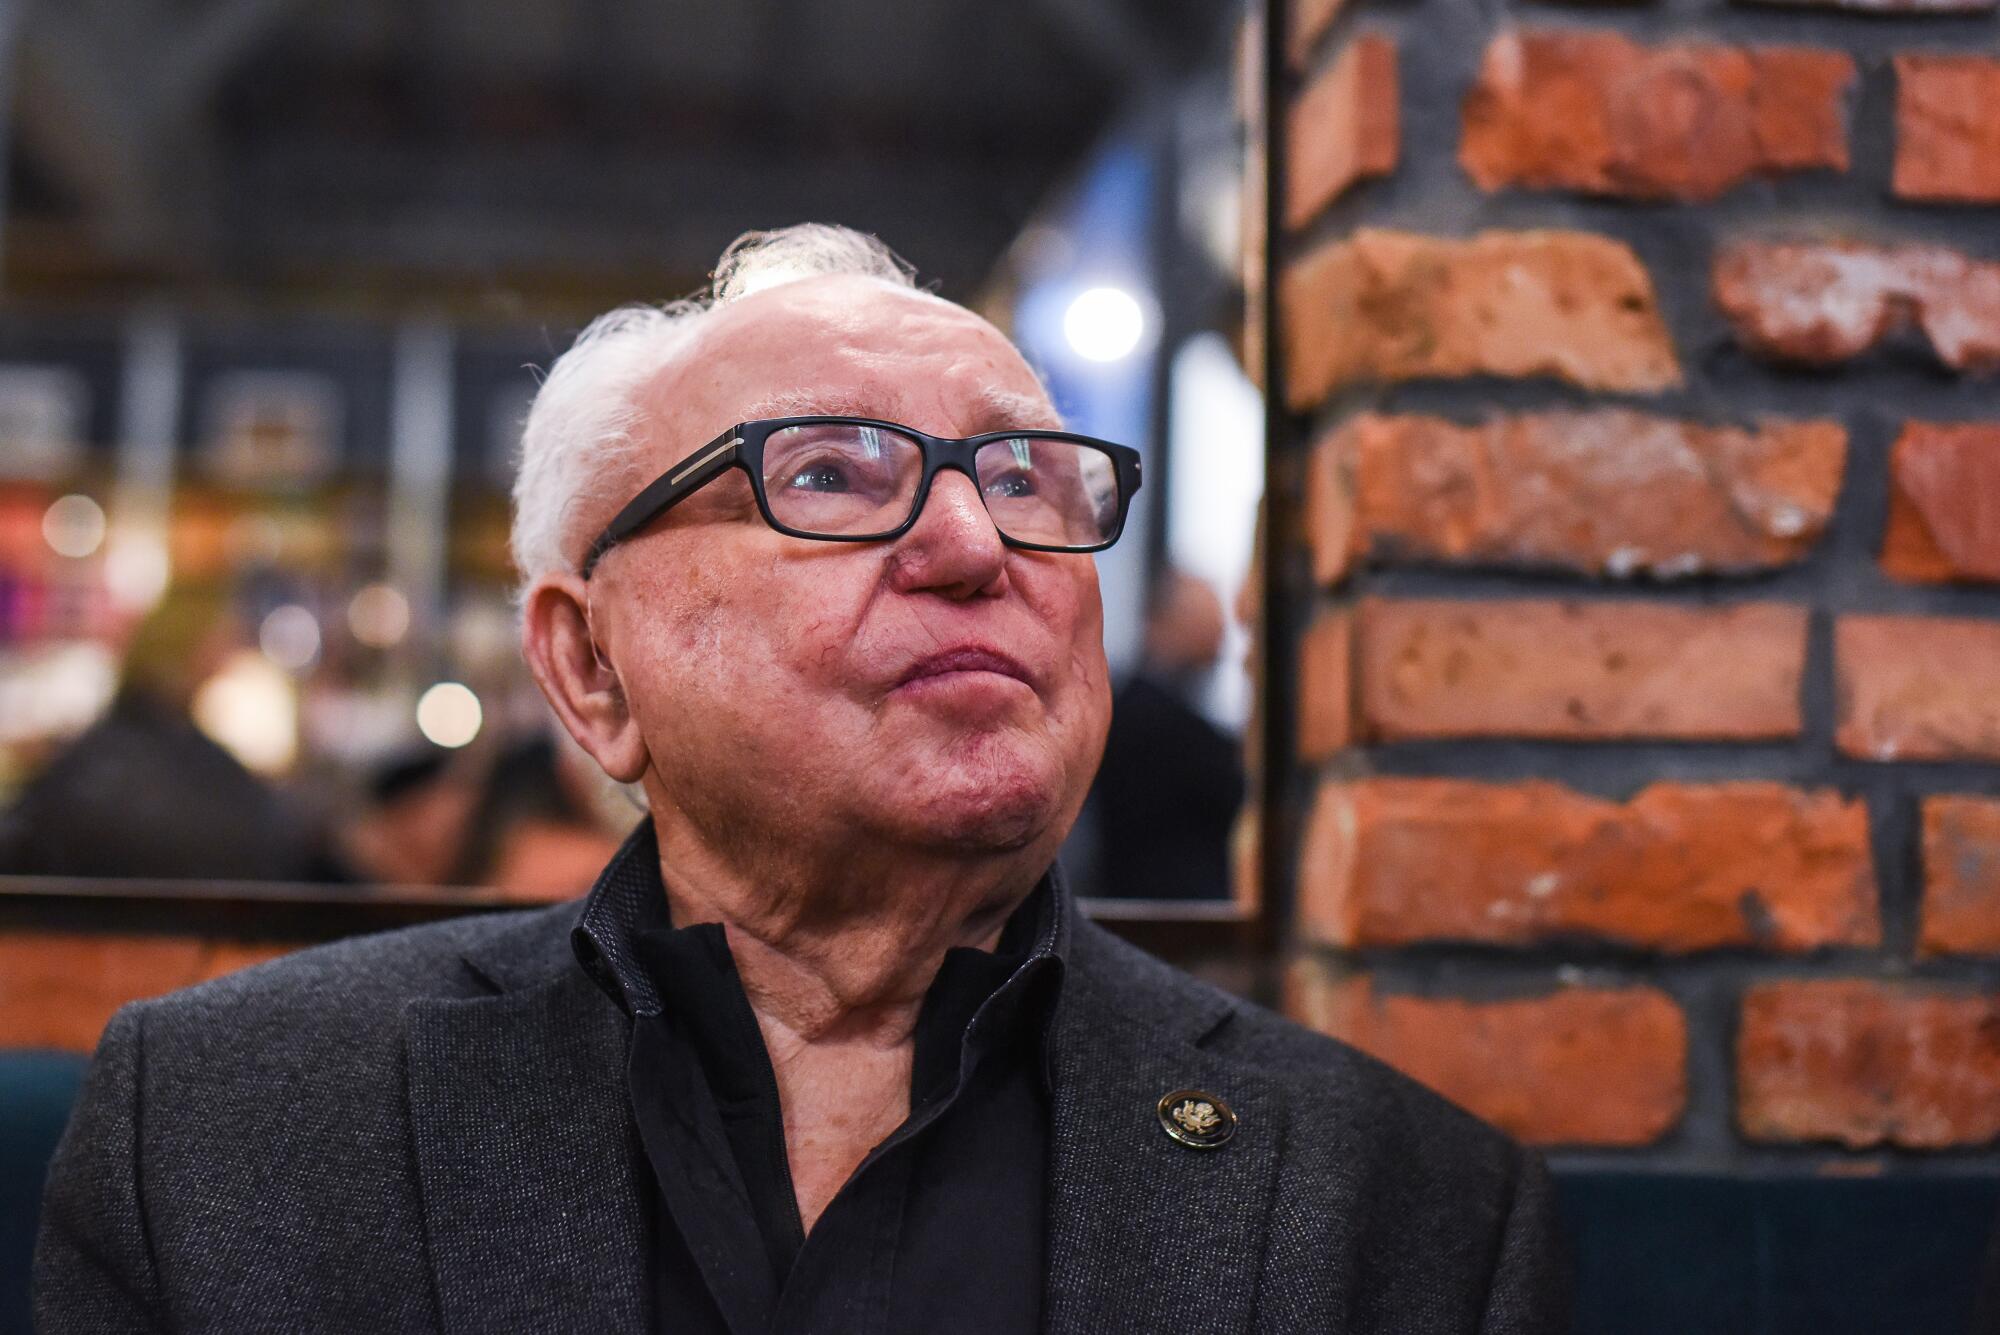 Hakman returned to Poland for the 75th anniversary of the Auschwitz liberation.